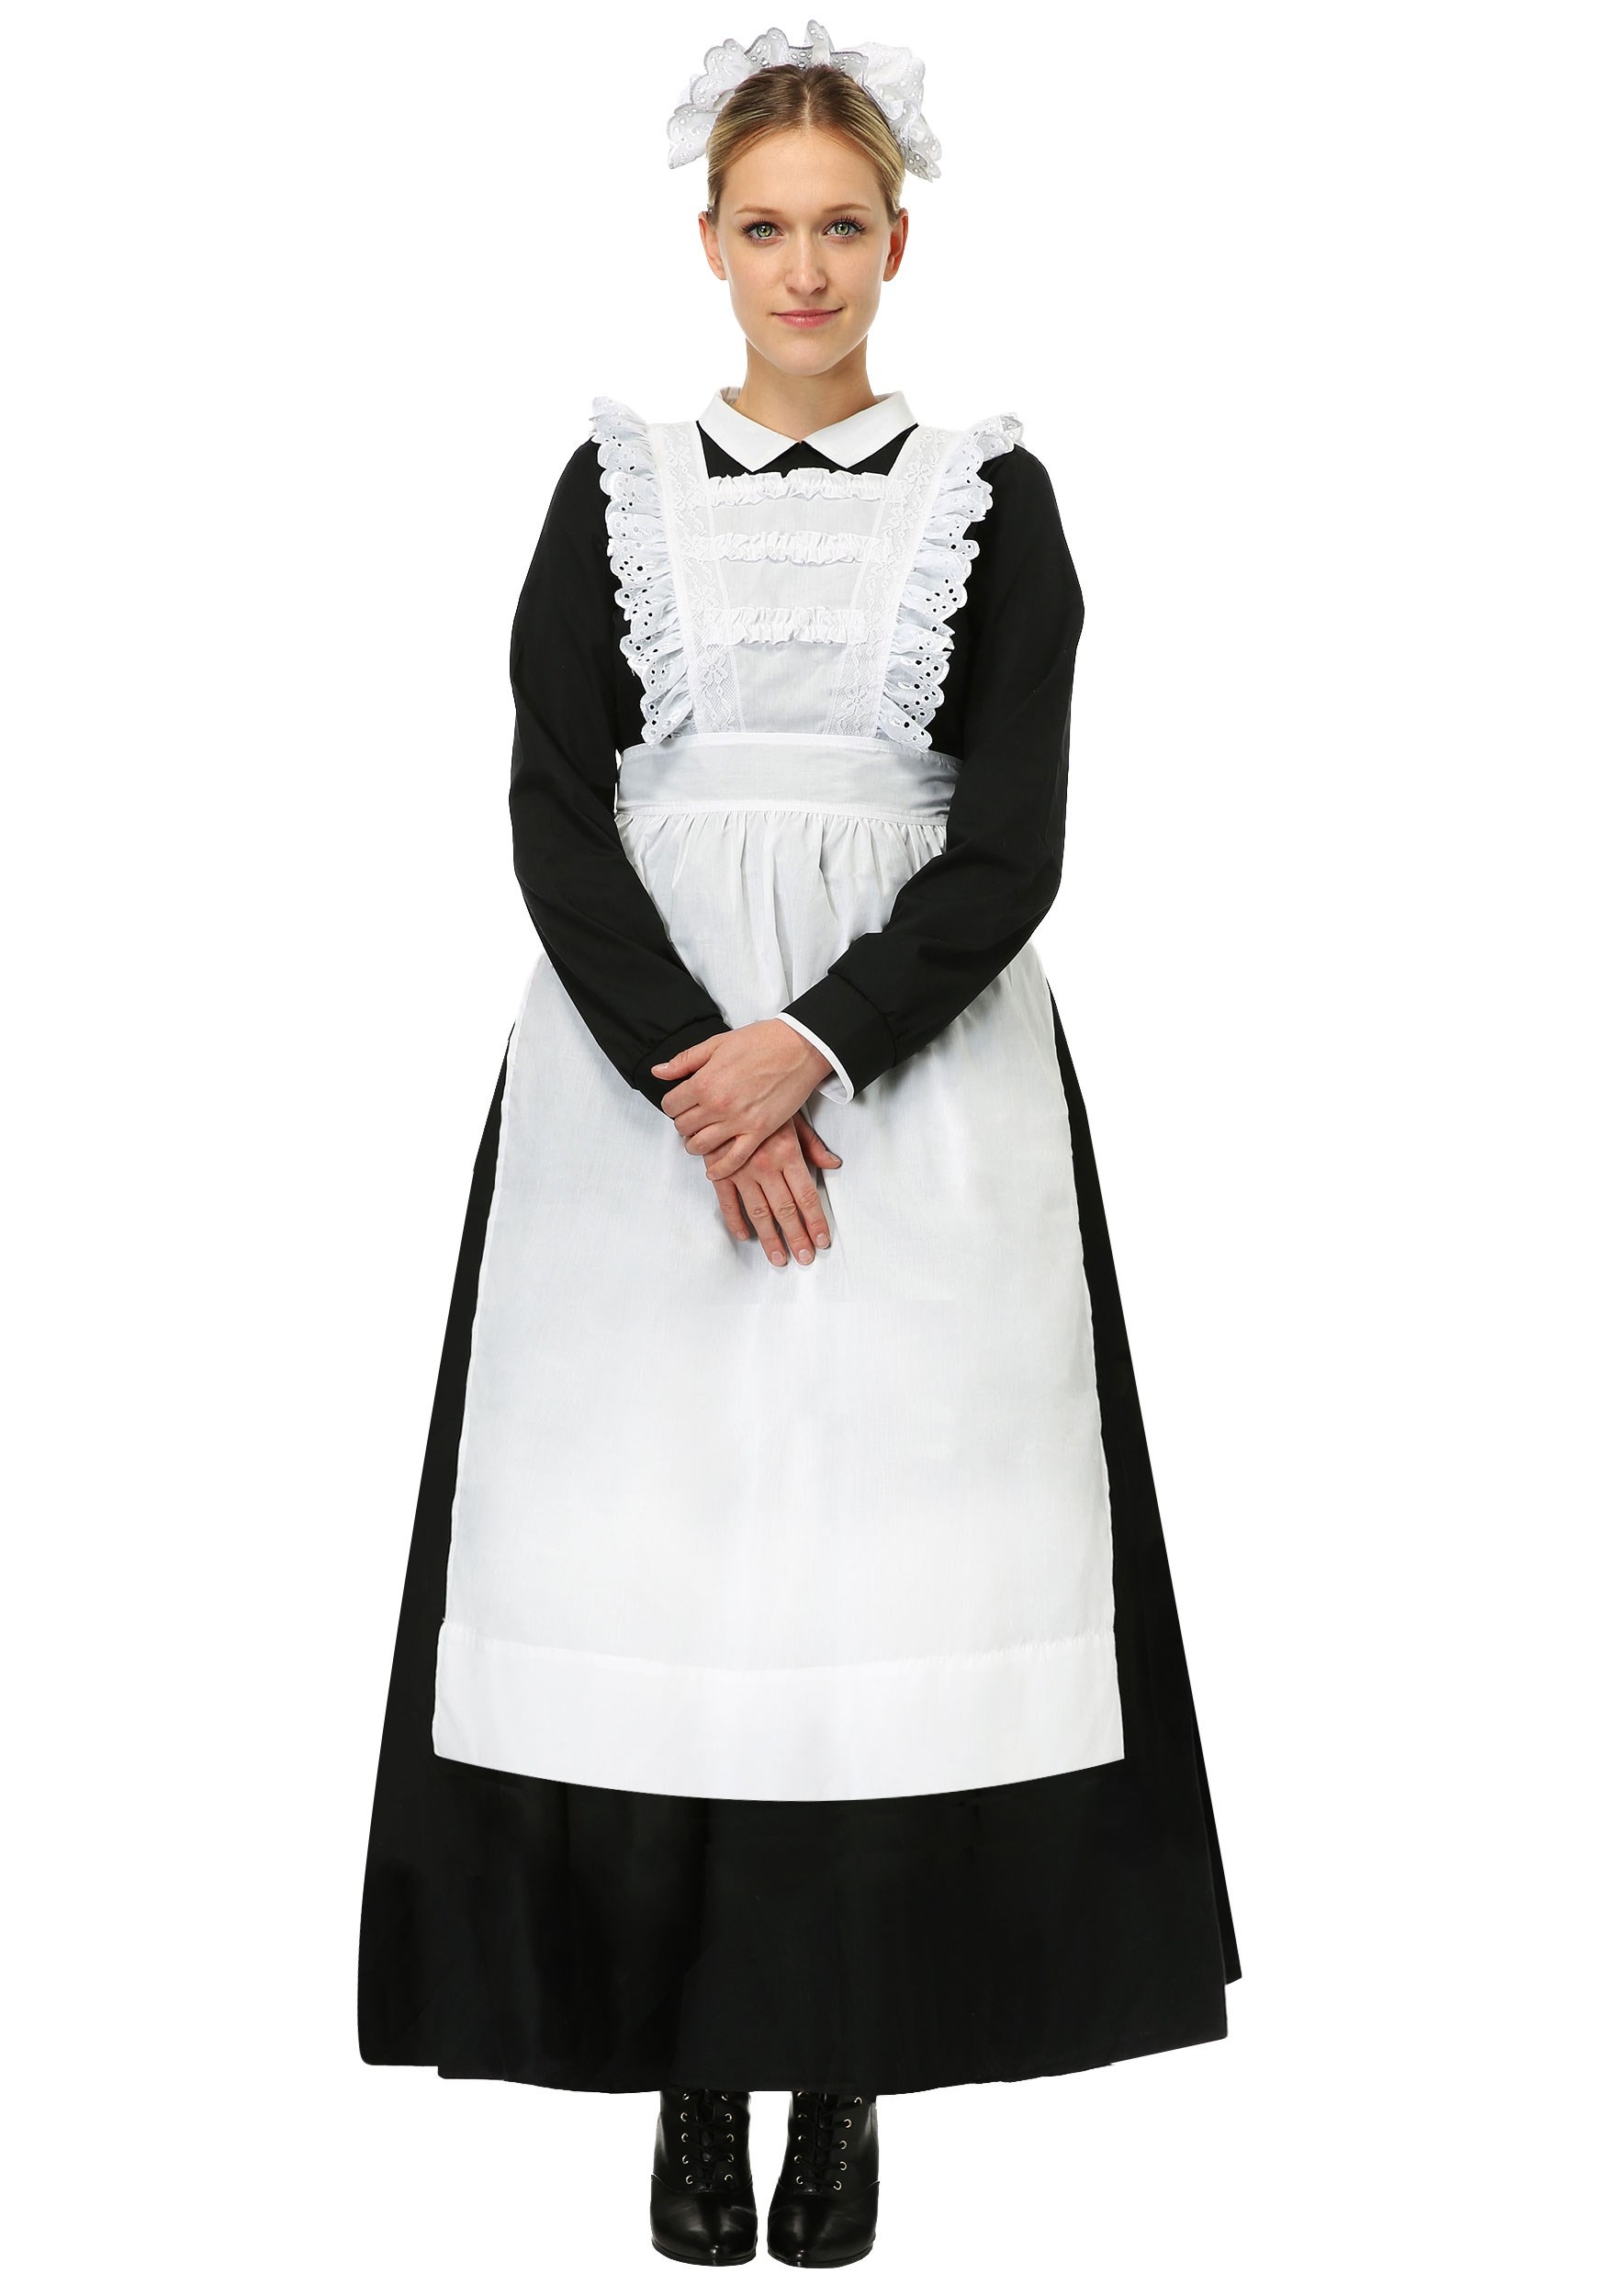 Image of Traditional Plus Size Maid Costume for Women ID FUN1520PL-1X